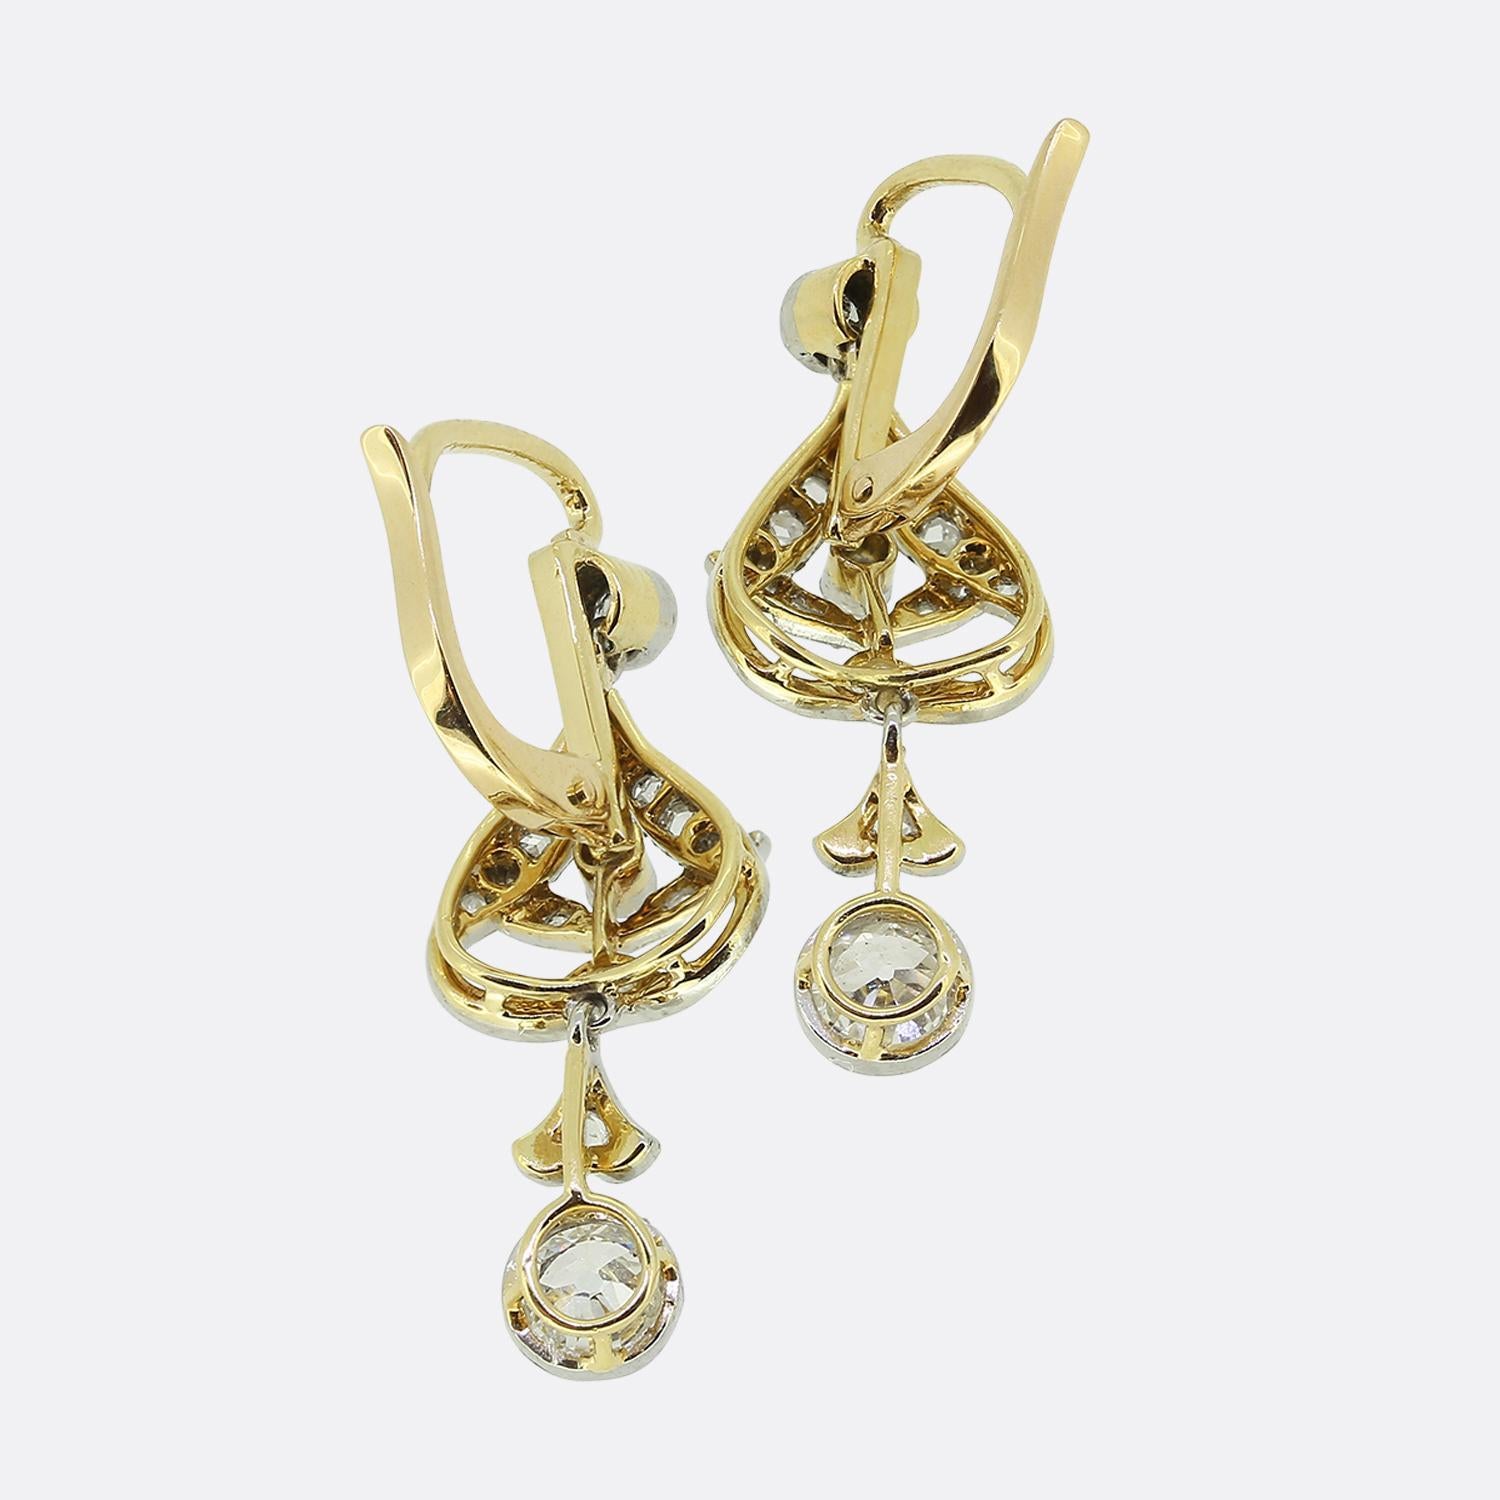 Here we have a fabulous pair of diamond drop earrings dating back to the Edwardian period. Both identical antique pieces showcases an open foliated design with fine milgrain set channels filled with rose cut diamonds. This frame is surmounted by a